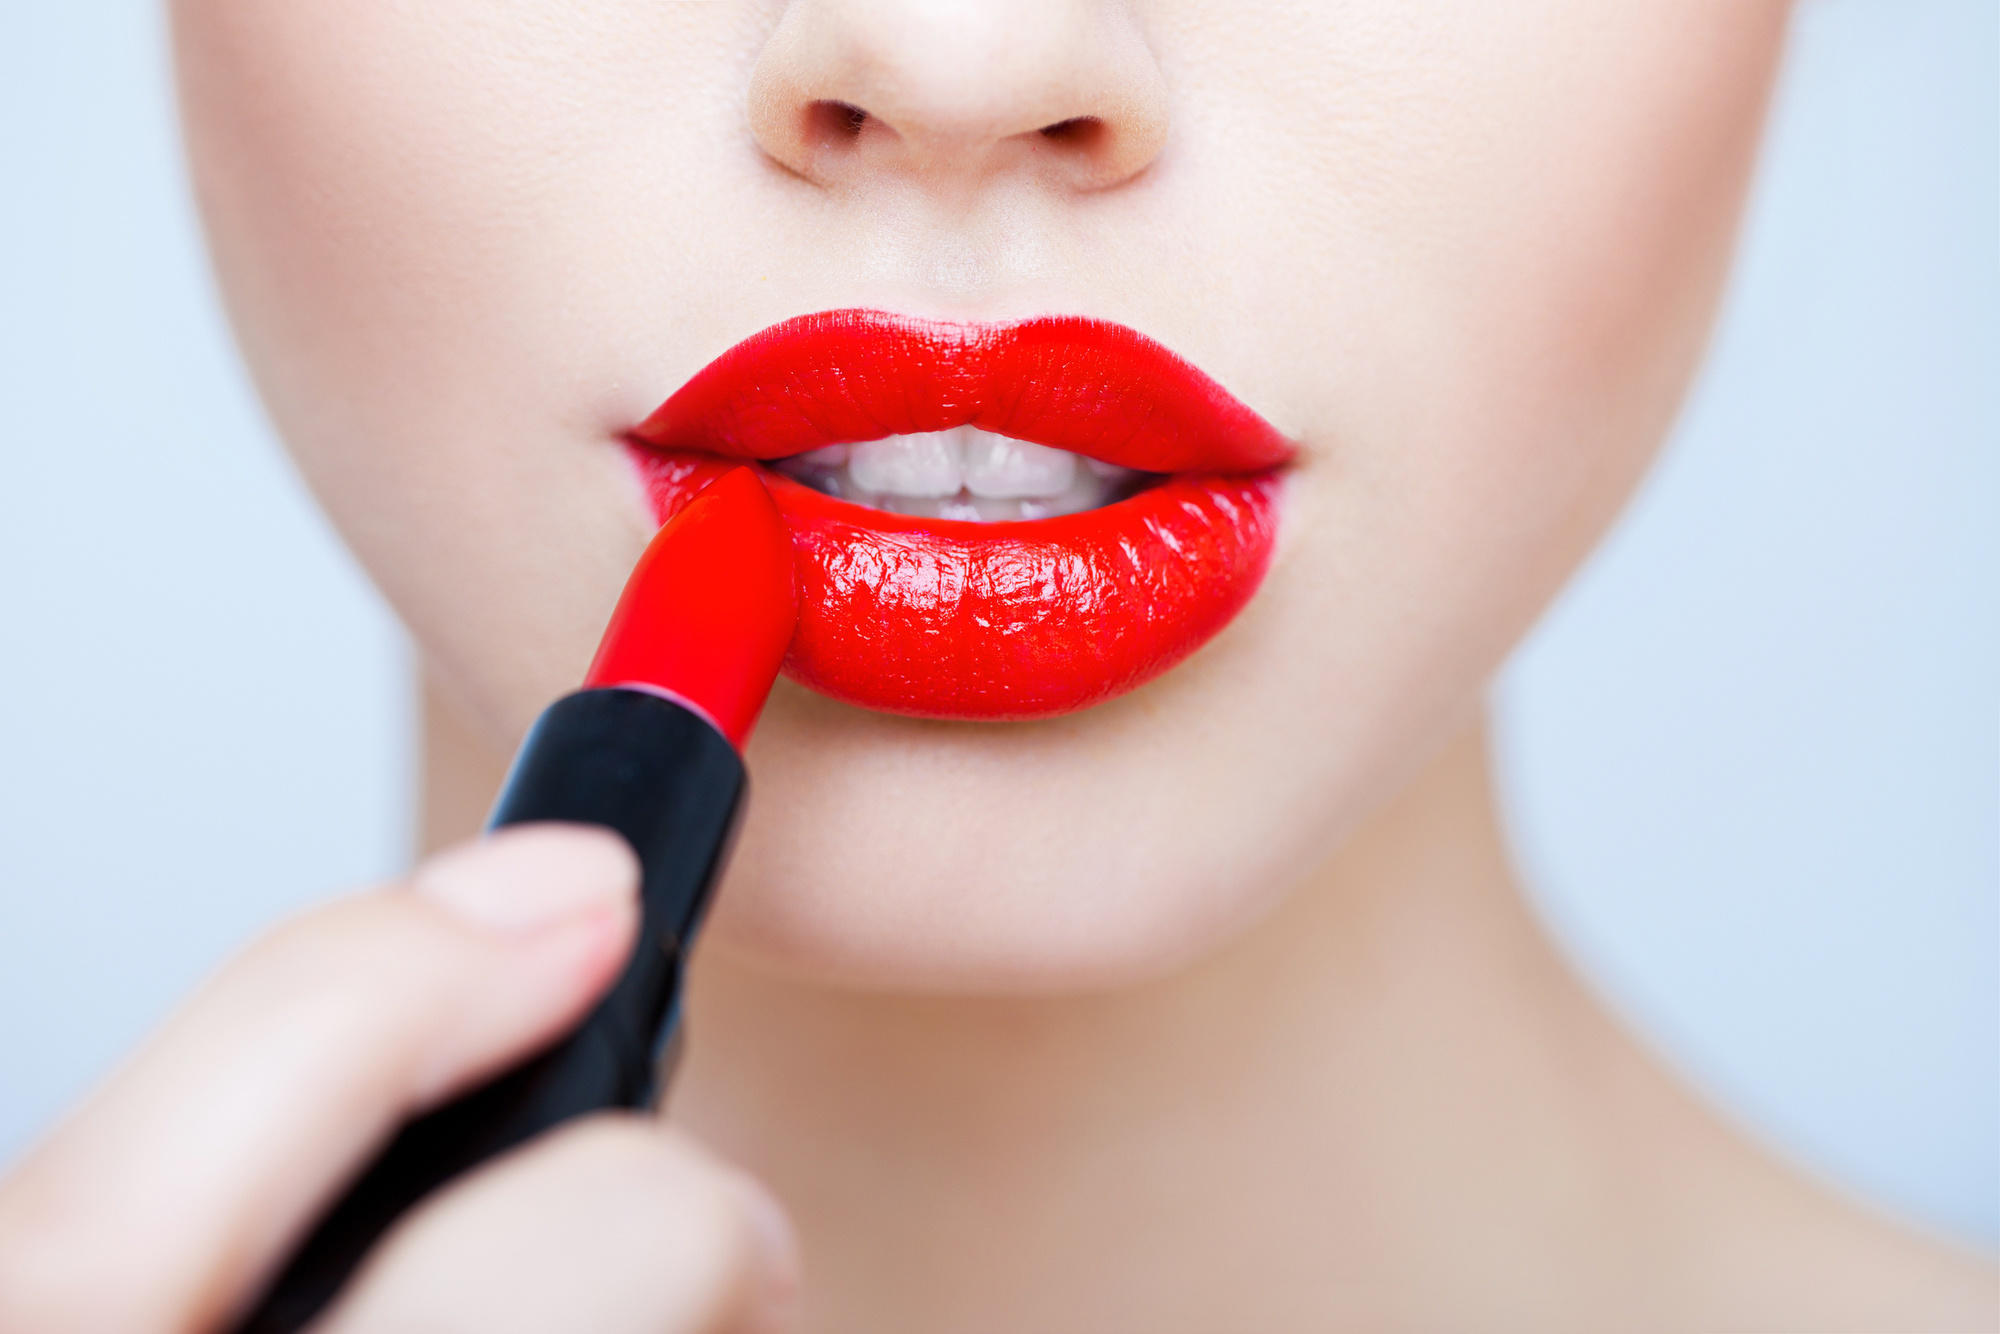 Men tend to look at women who wear lipstick for a longer time than women with no lipstick. 